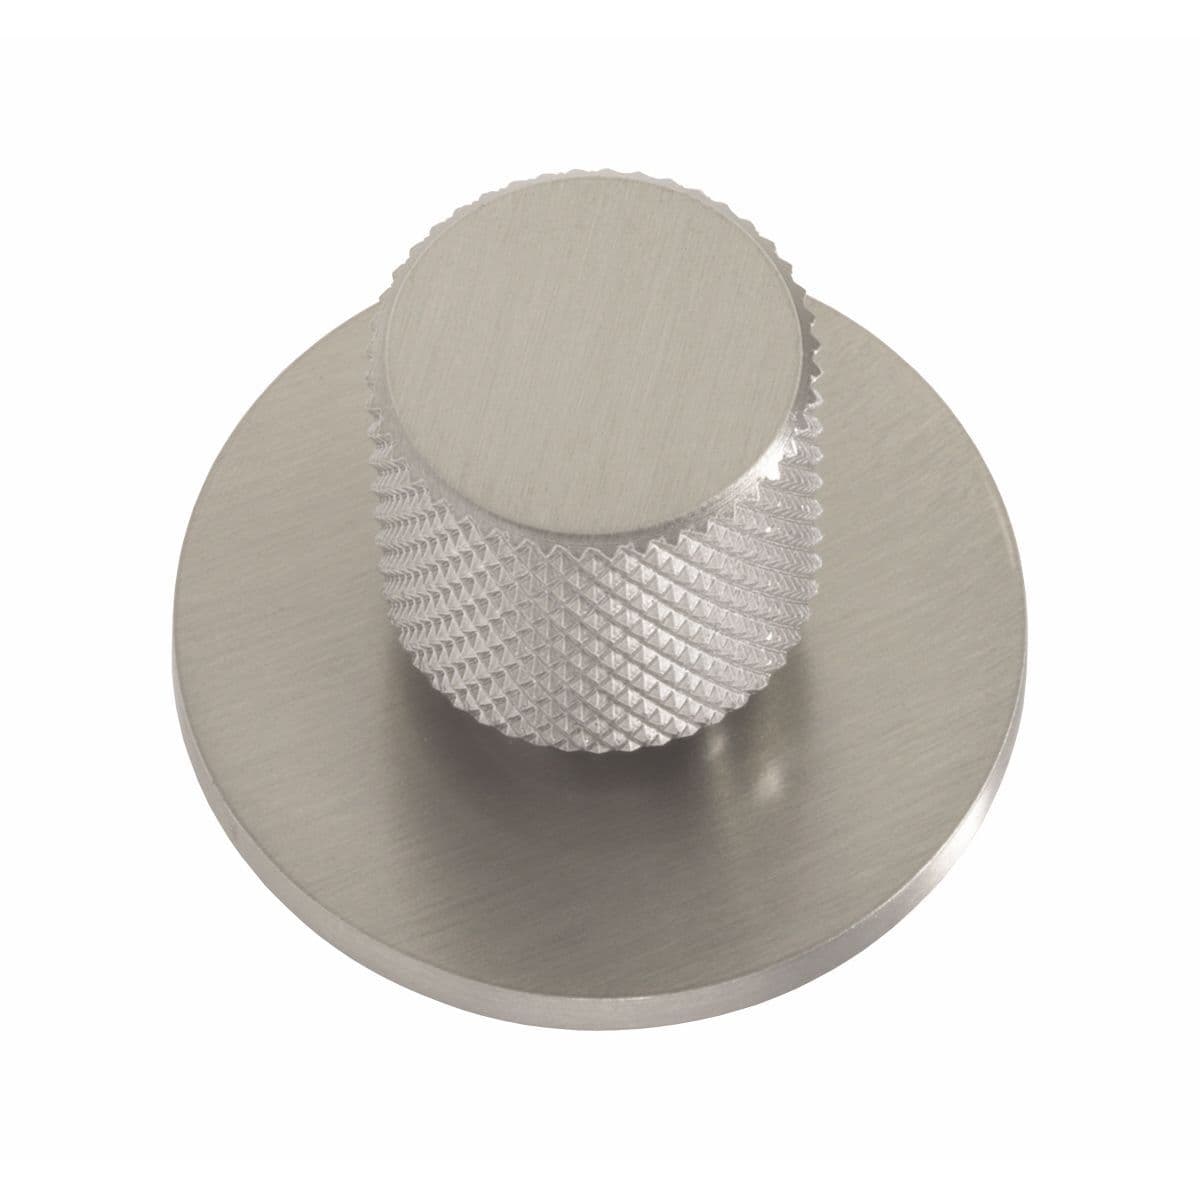 KNURLED ROUND KNOB c/w CIRCULAR BACKPLATE Cupboard Handle - 40mm diameter - 3 finishes (PWS K1111.20)